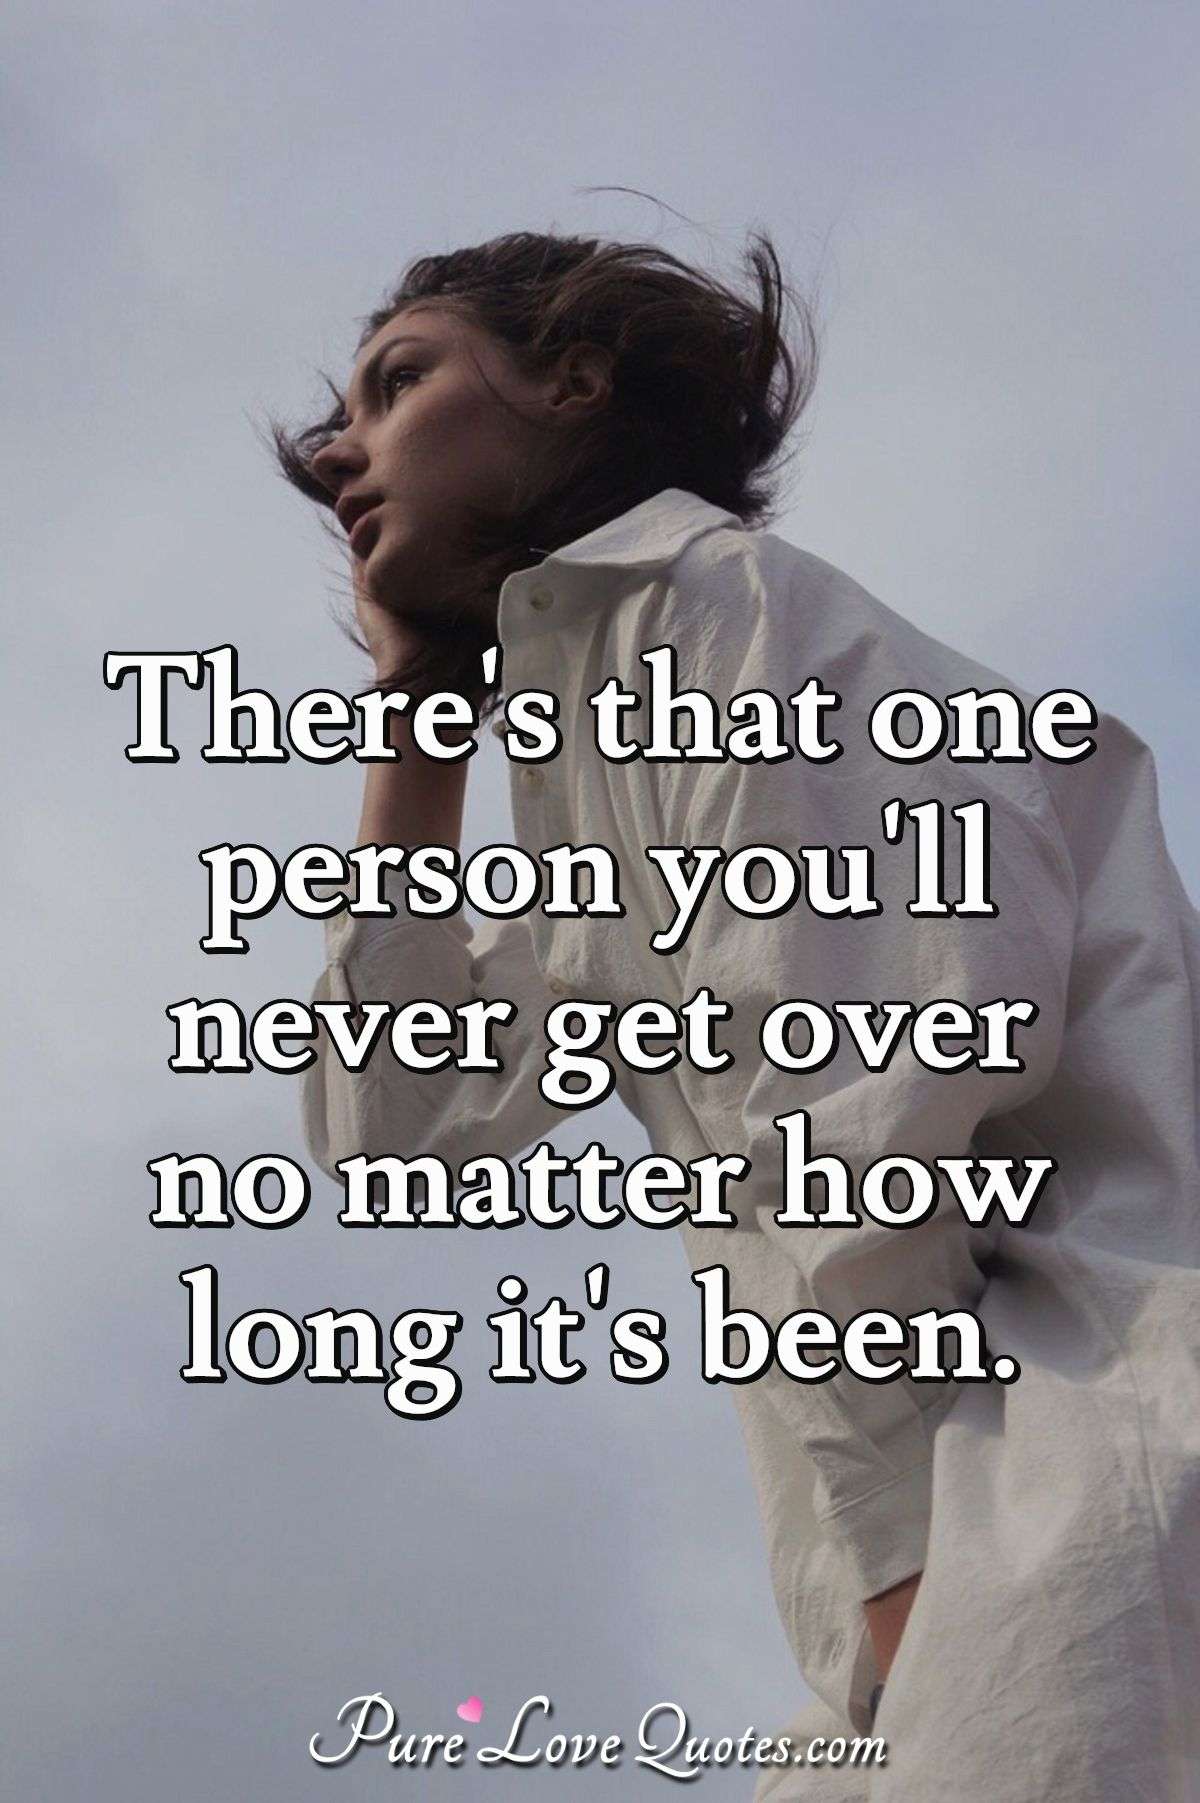 There's that one person you'll never get over no matter how long it's been. - Anonymous